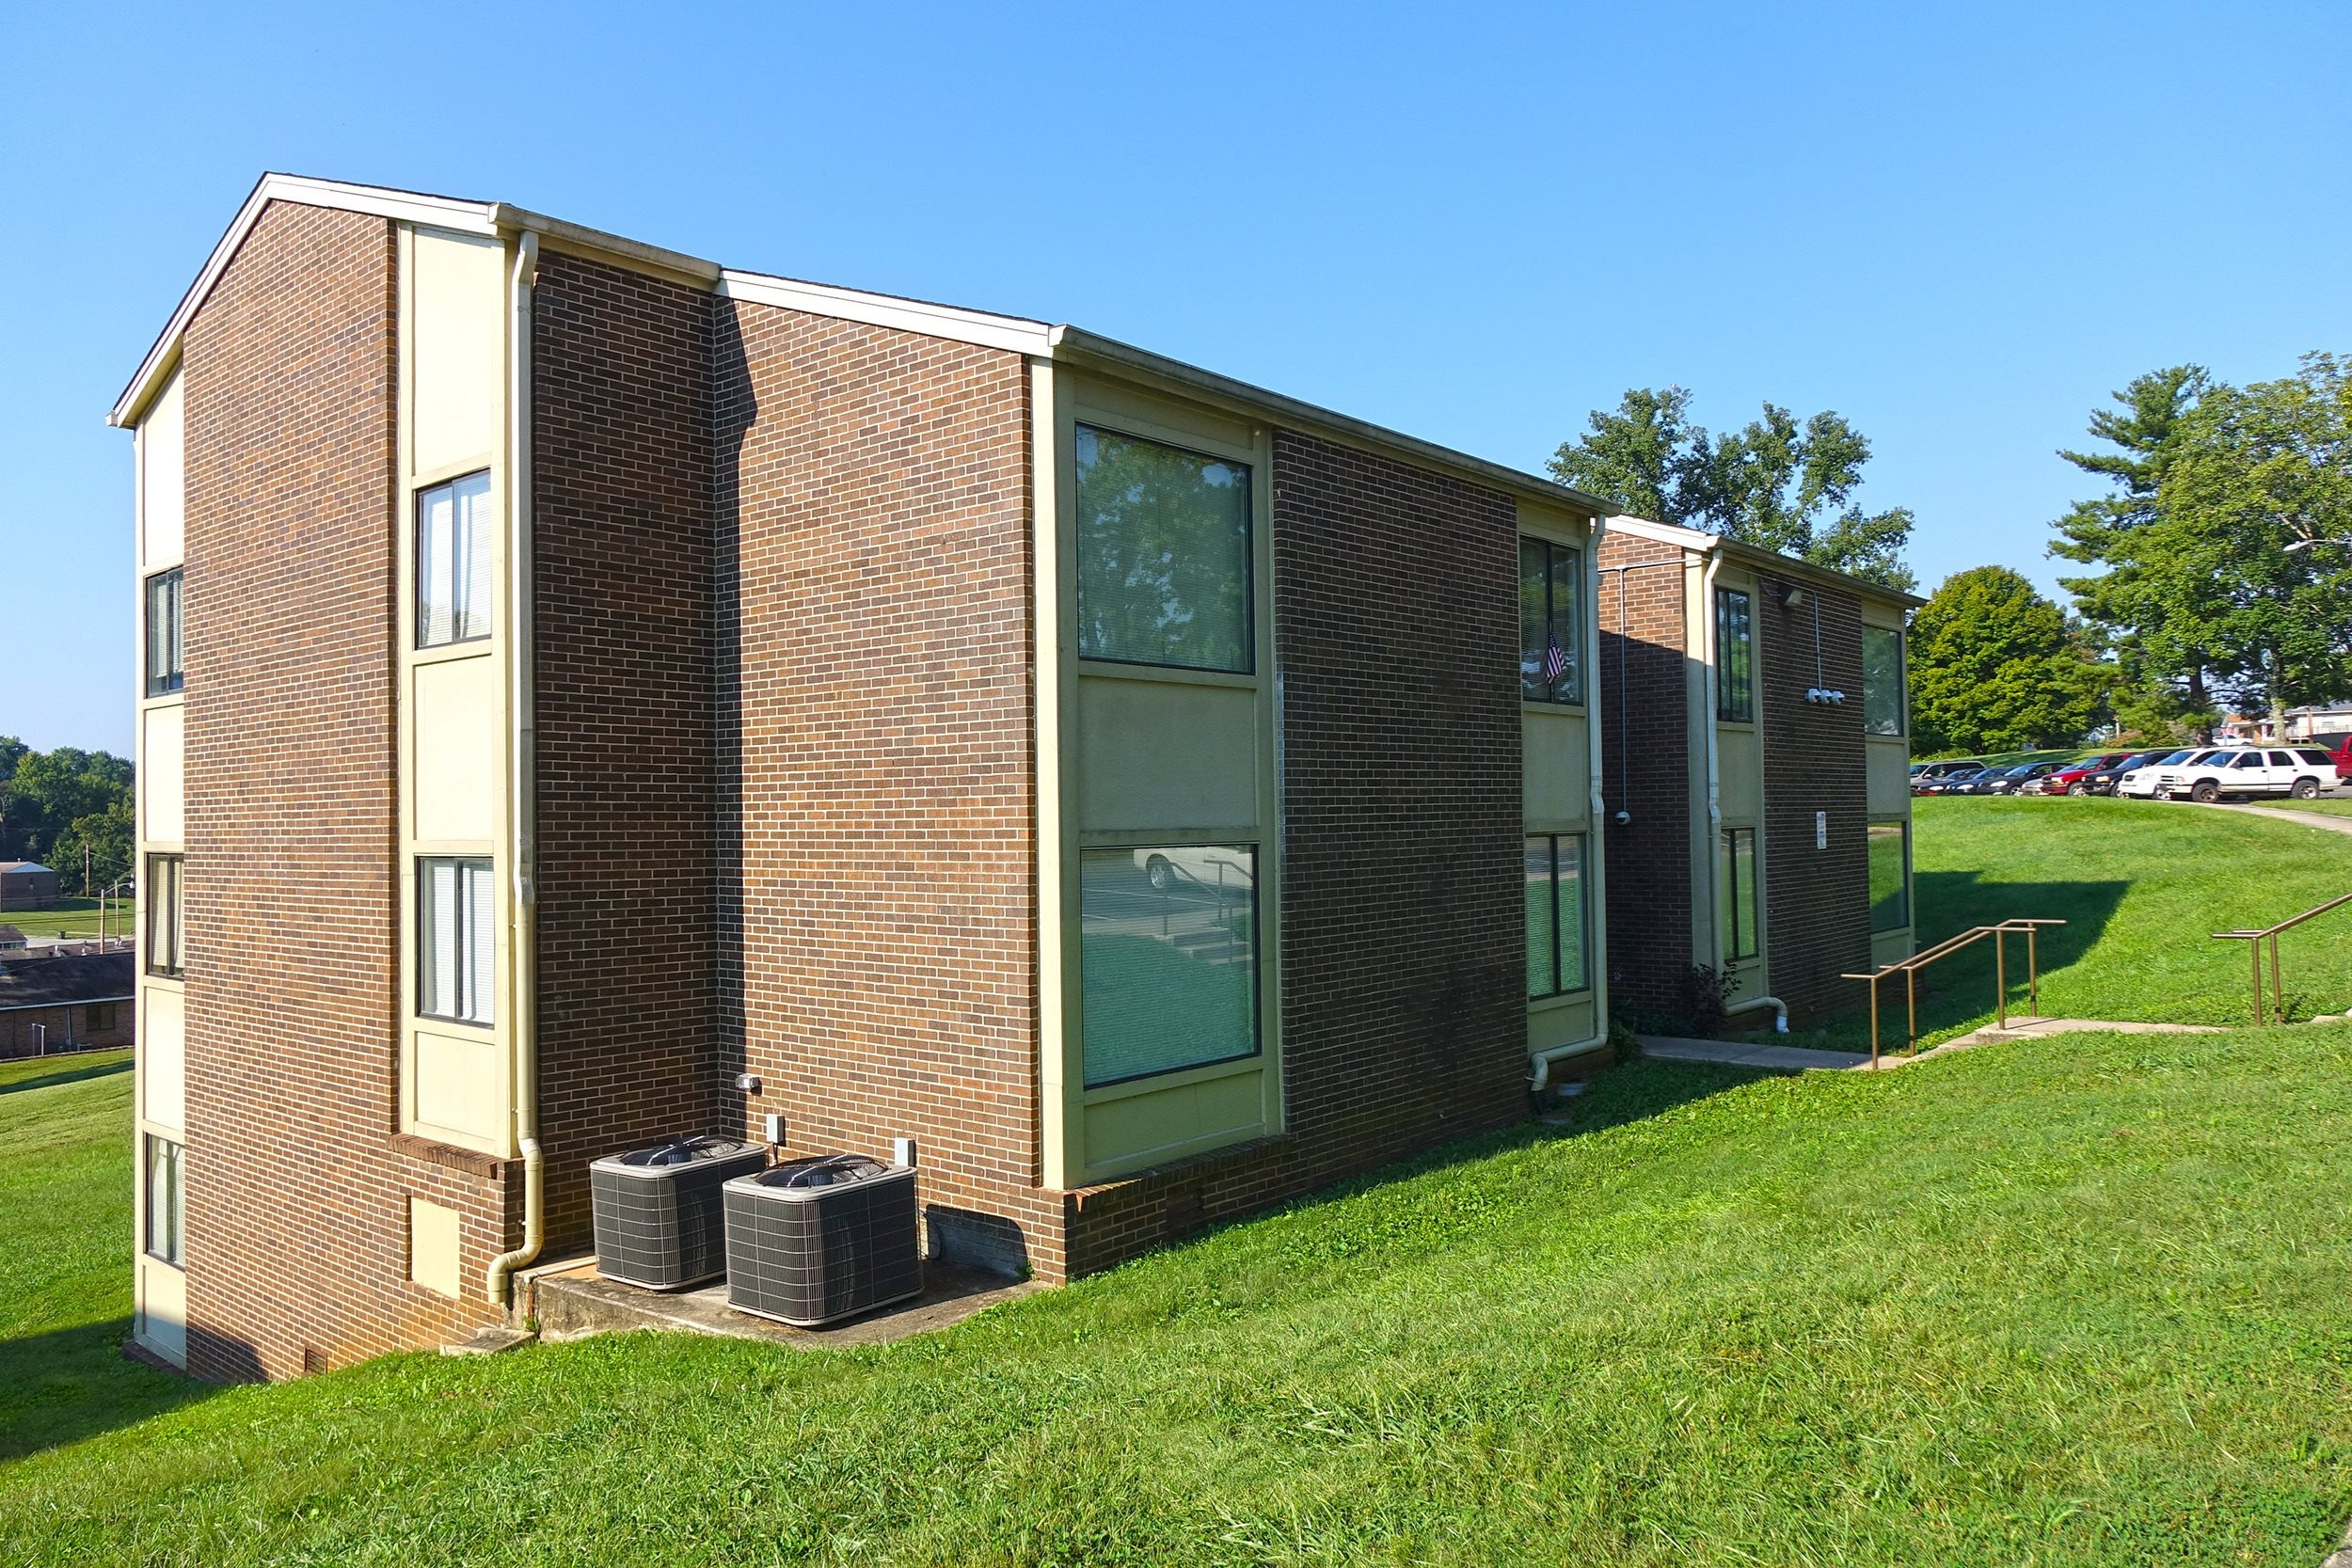 a row of modular housing units in a grassy area